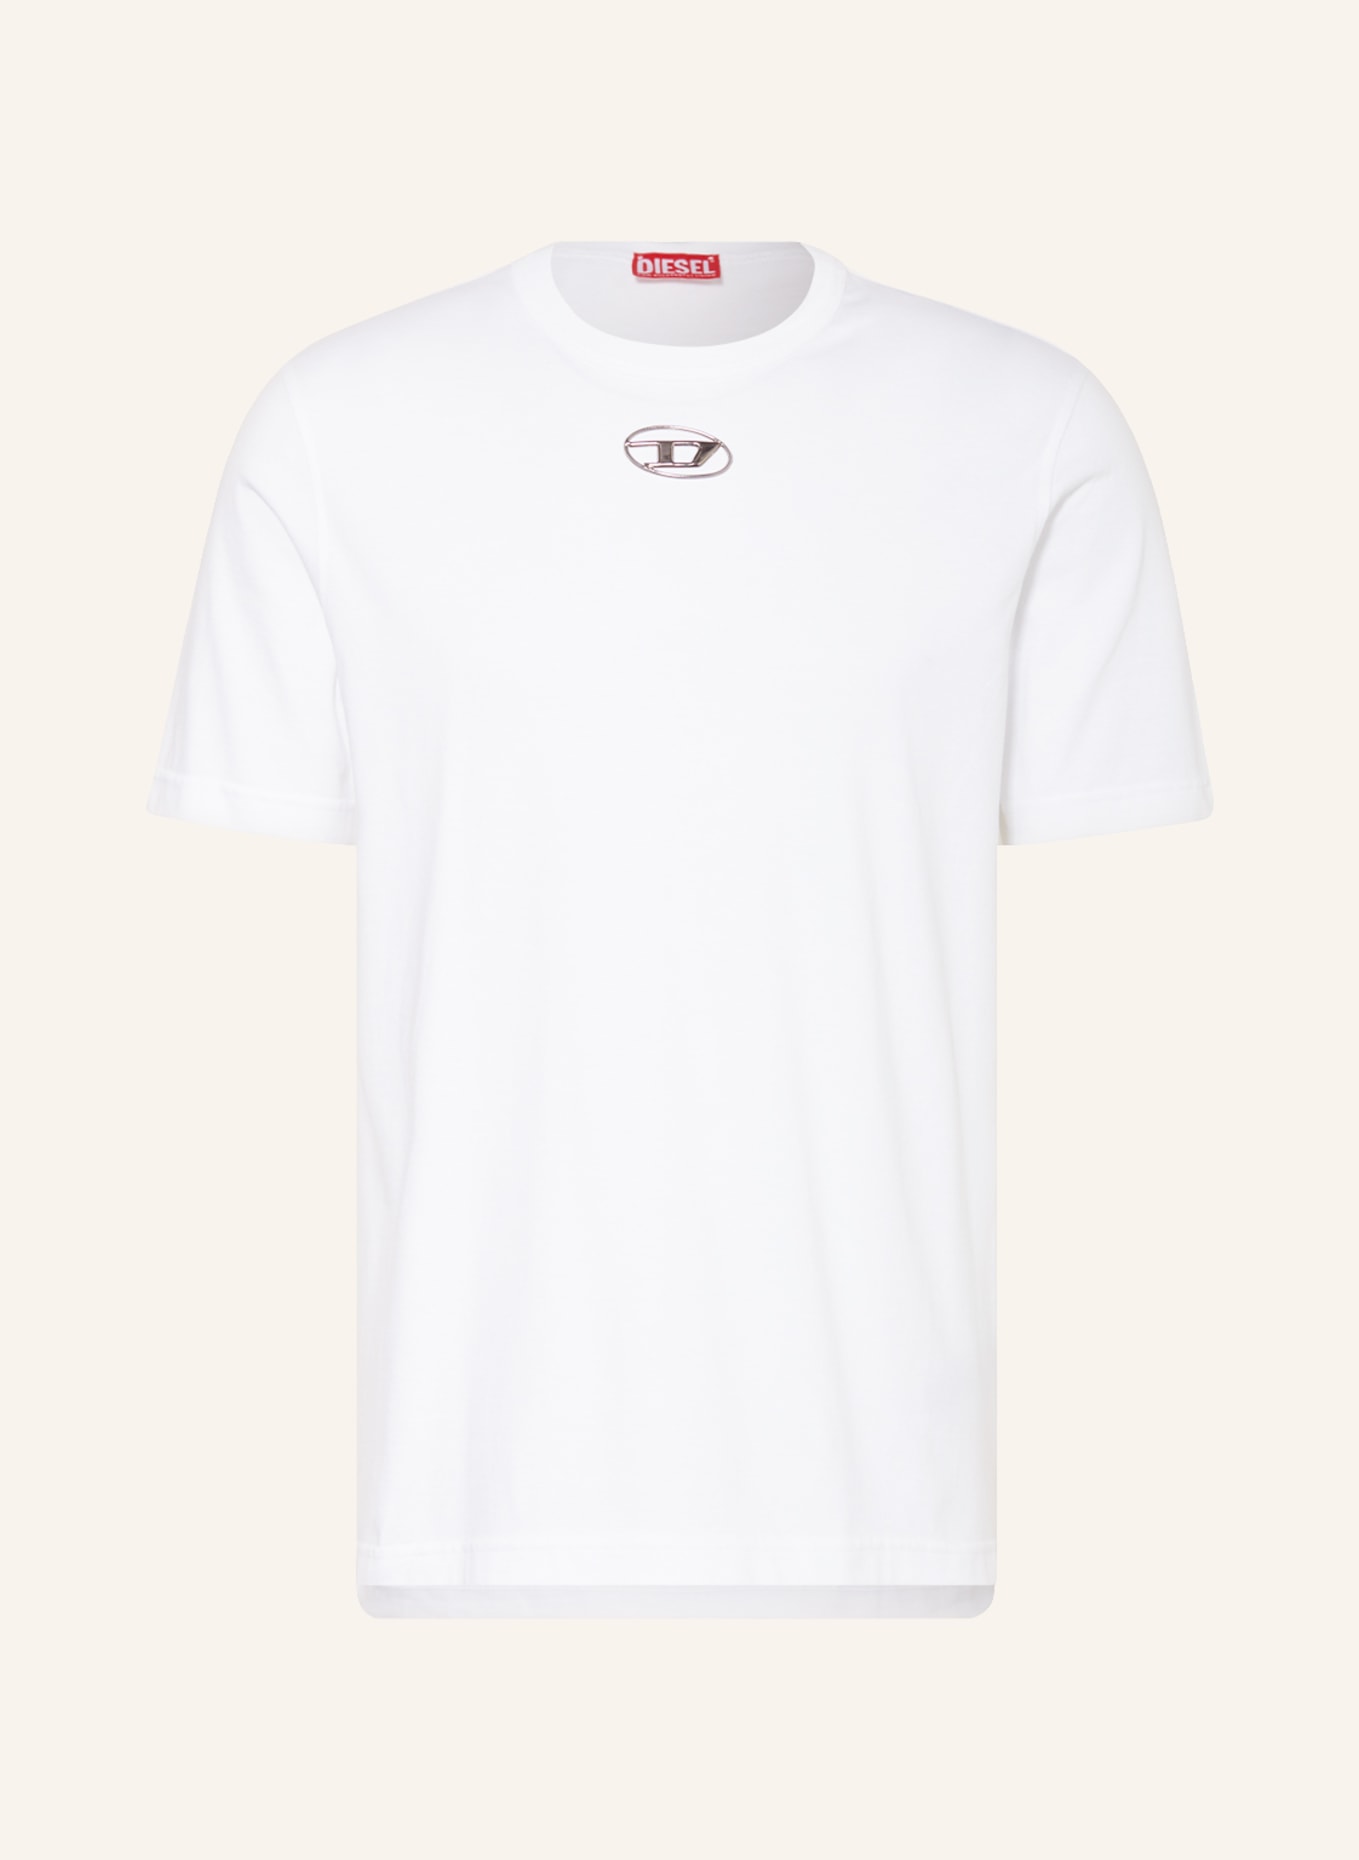 DIESEL T-shirt T-JUST-OD, Color: WHITE (Image 1)